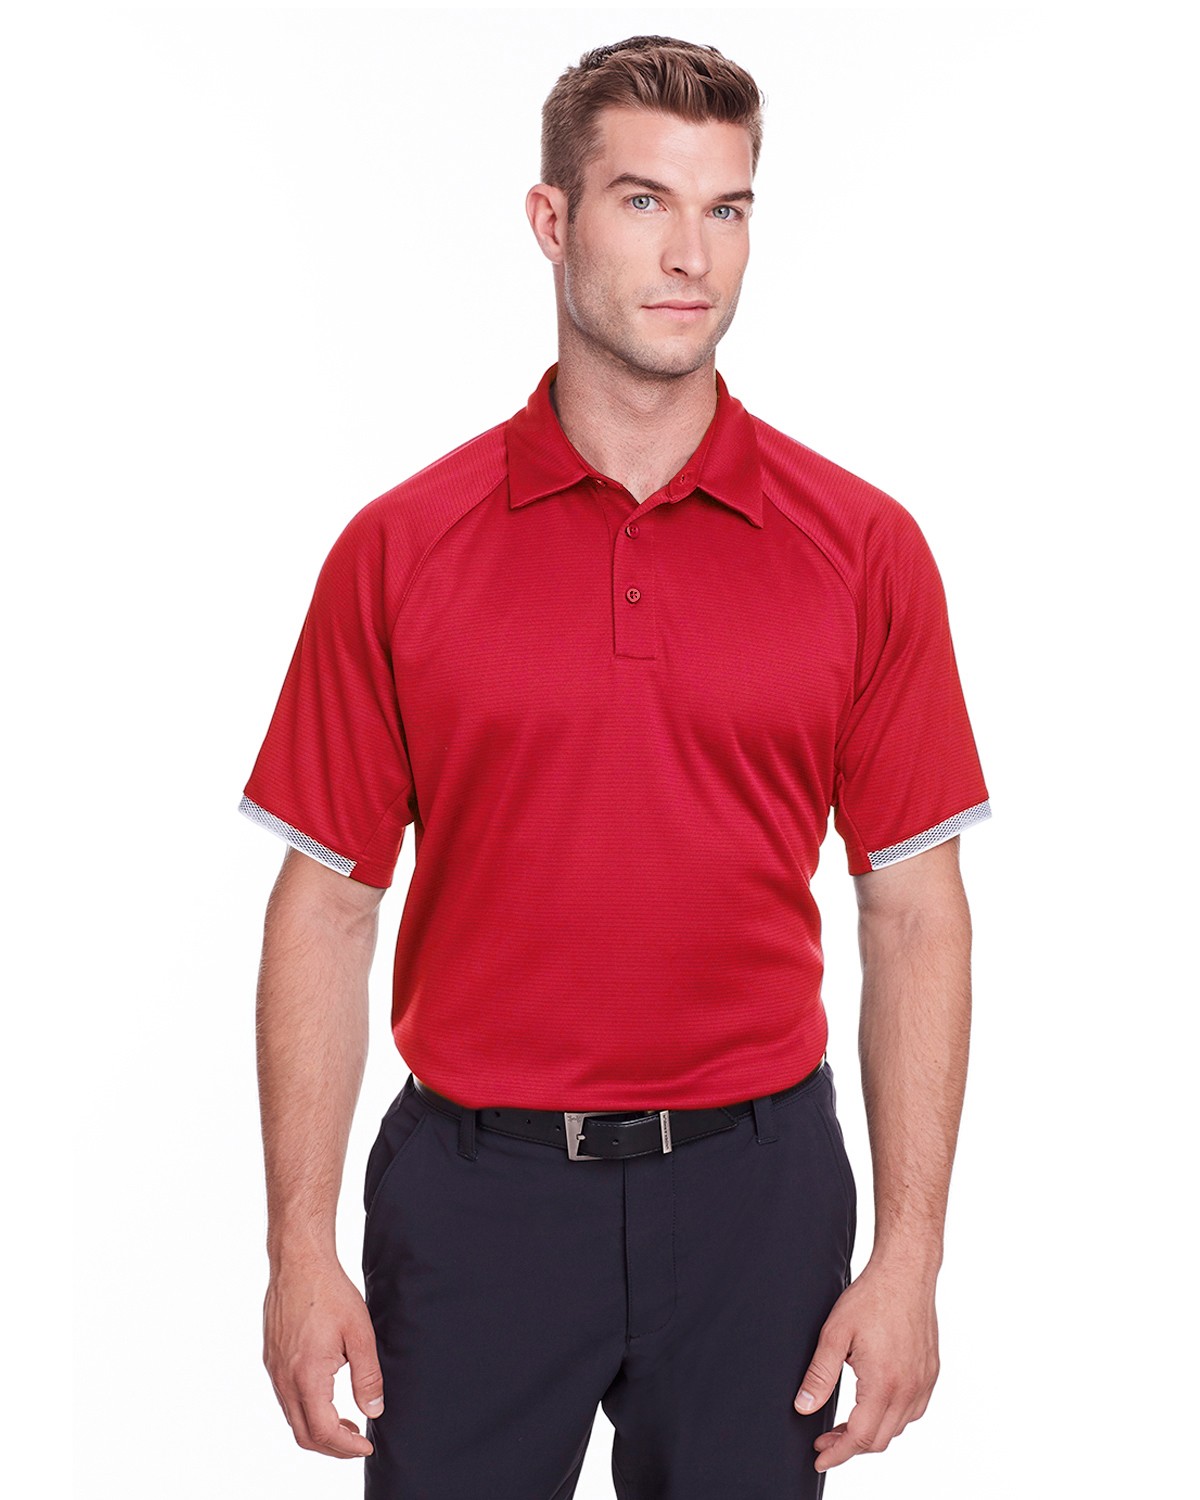 Under Armour 1343102 Custom Logo Embroidered Mens Corporate Rival Polo